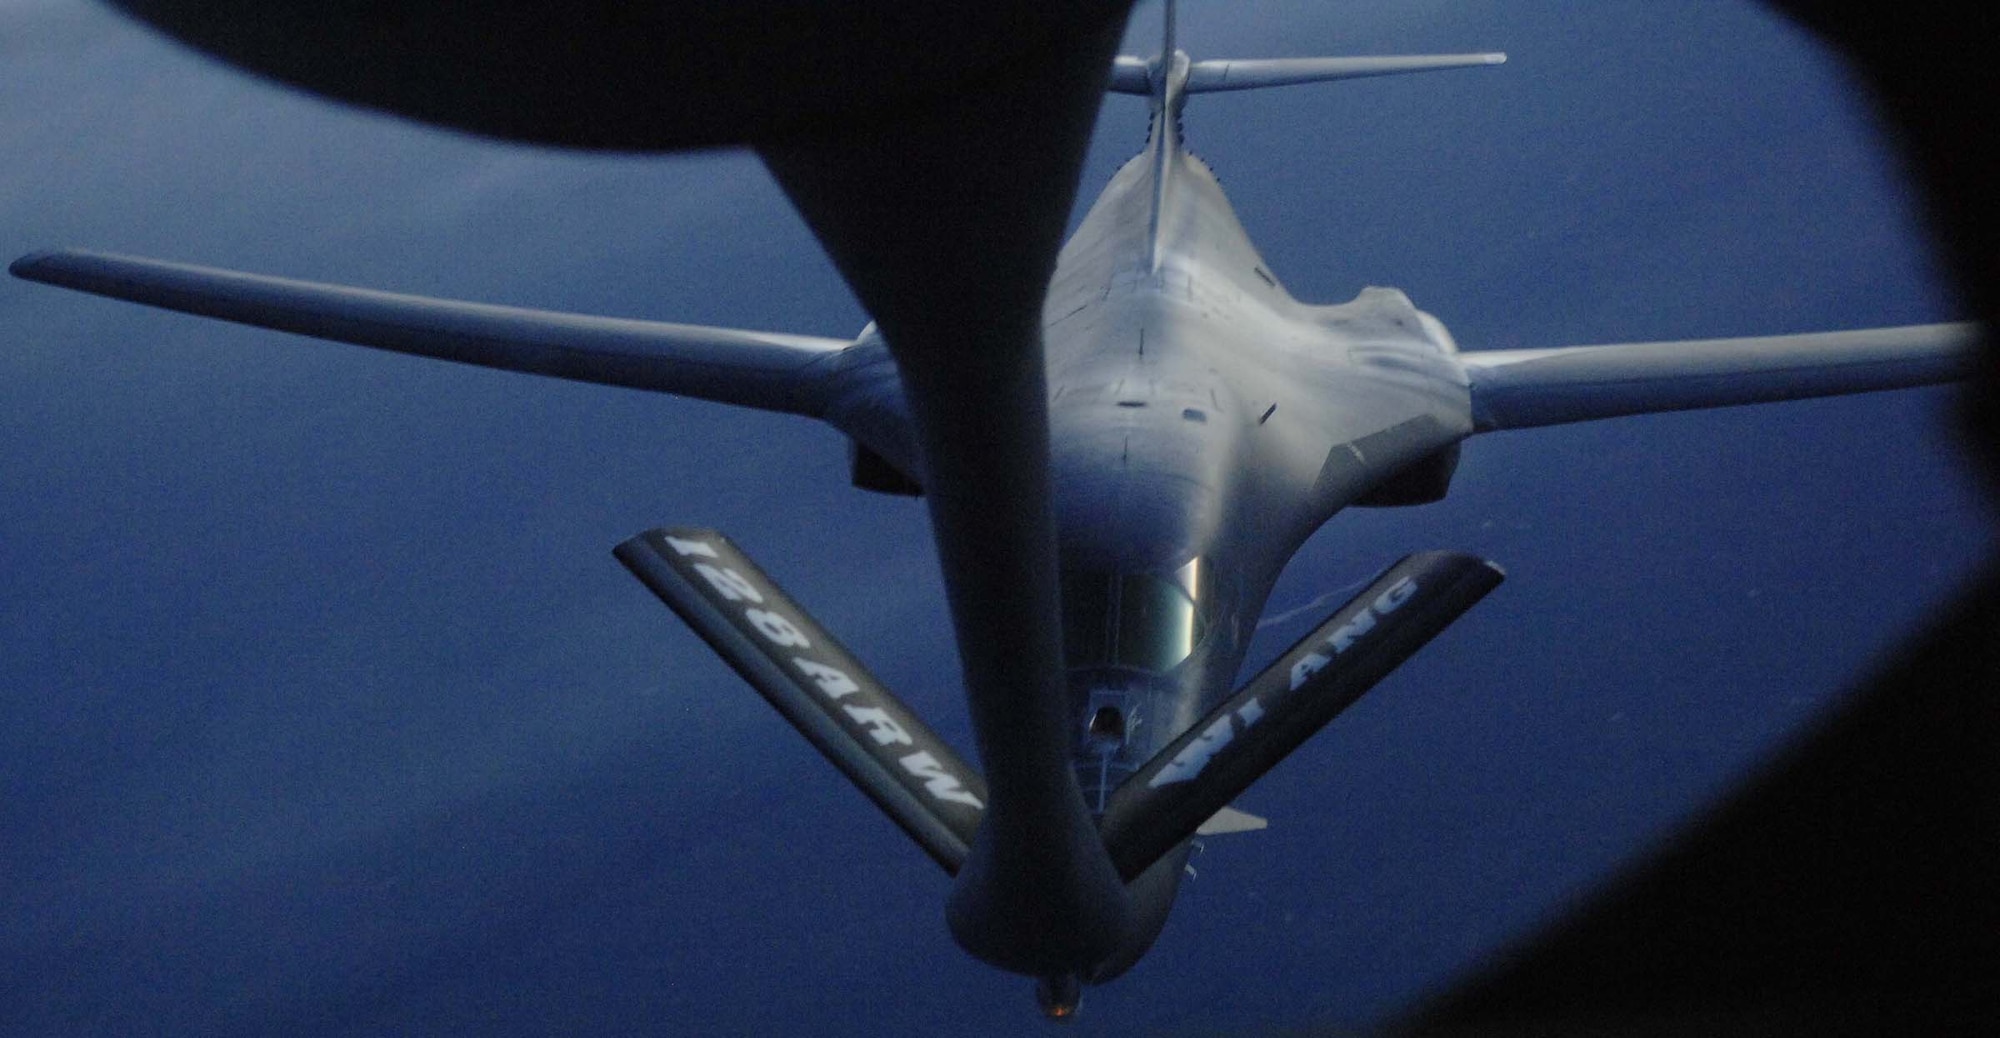 A B-1B Lancer assigned to the 34th Bomb Squadron approached the fuel boom of a KC-135R Stratotanker during a training sortie over South Dakota, May 12. The KC-135 was piloted by members of the Wisconsin Air National Guard's 128th Air Refueling Wing.  The team was here for ten days to enable Ellsworth's 24-hour surge operations. (U.S. Air Force photo/Airman 1st Class Abigail Klein)